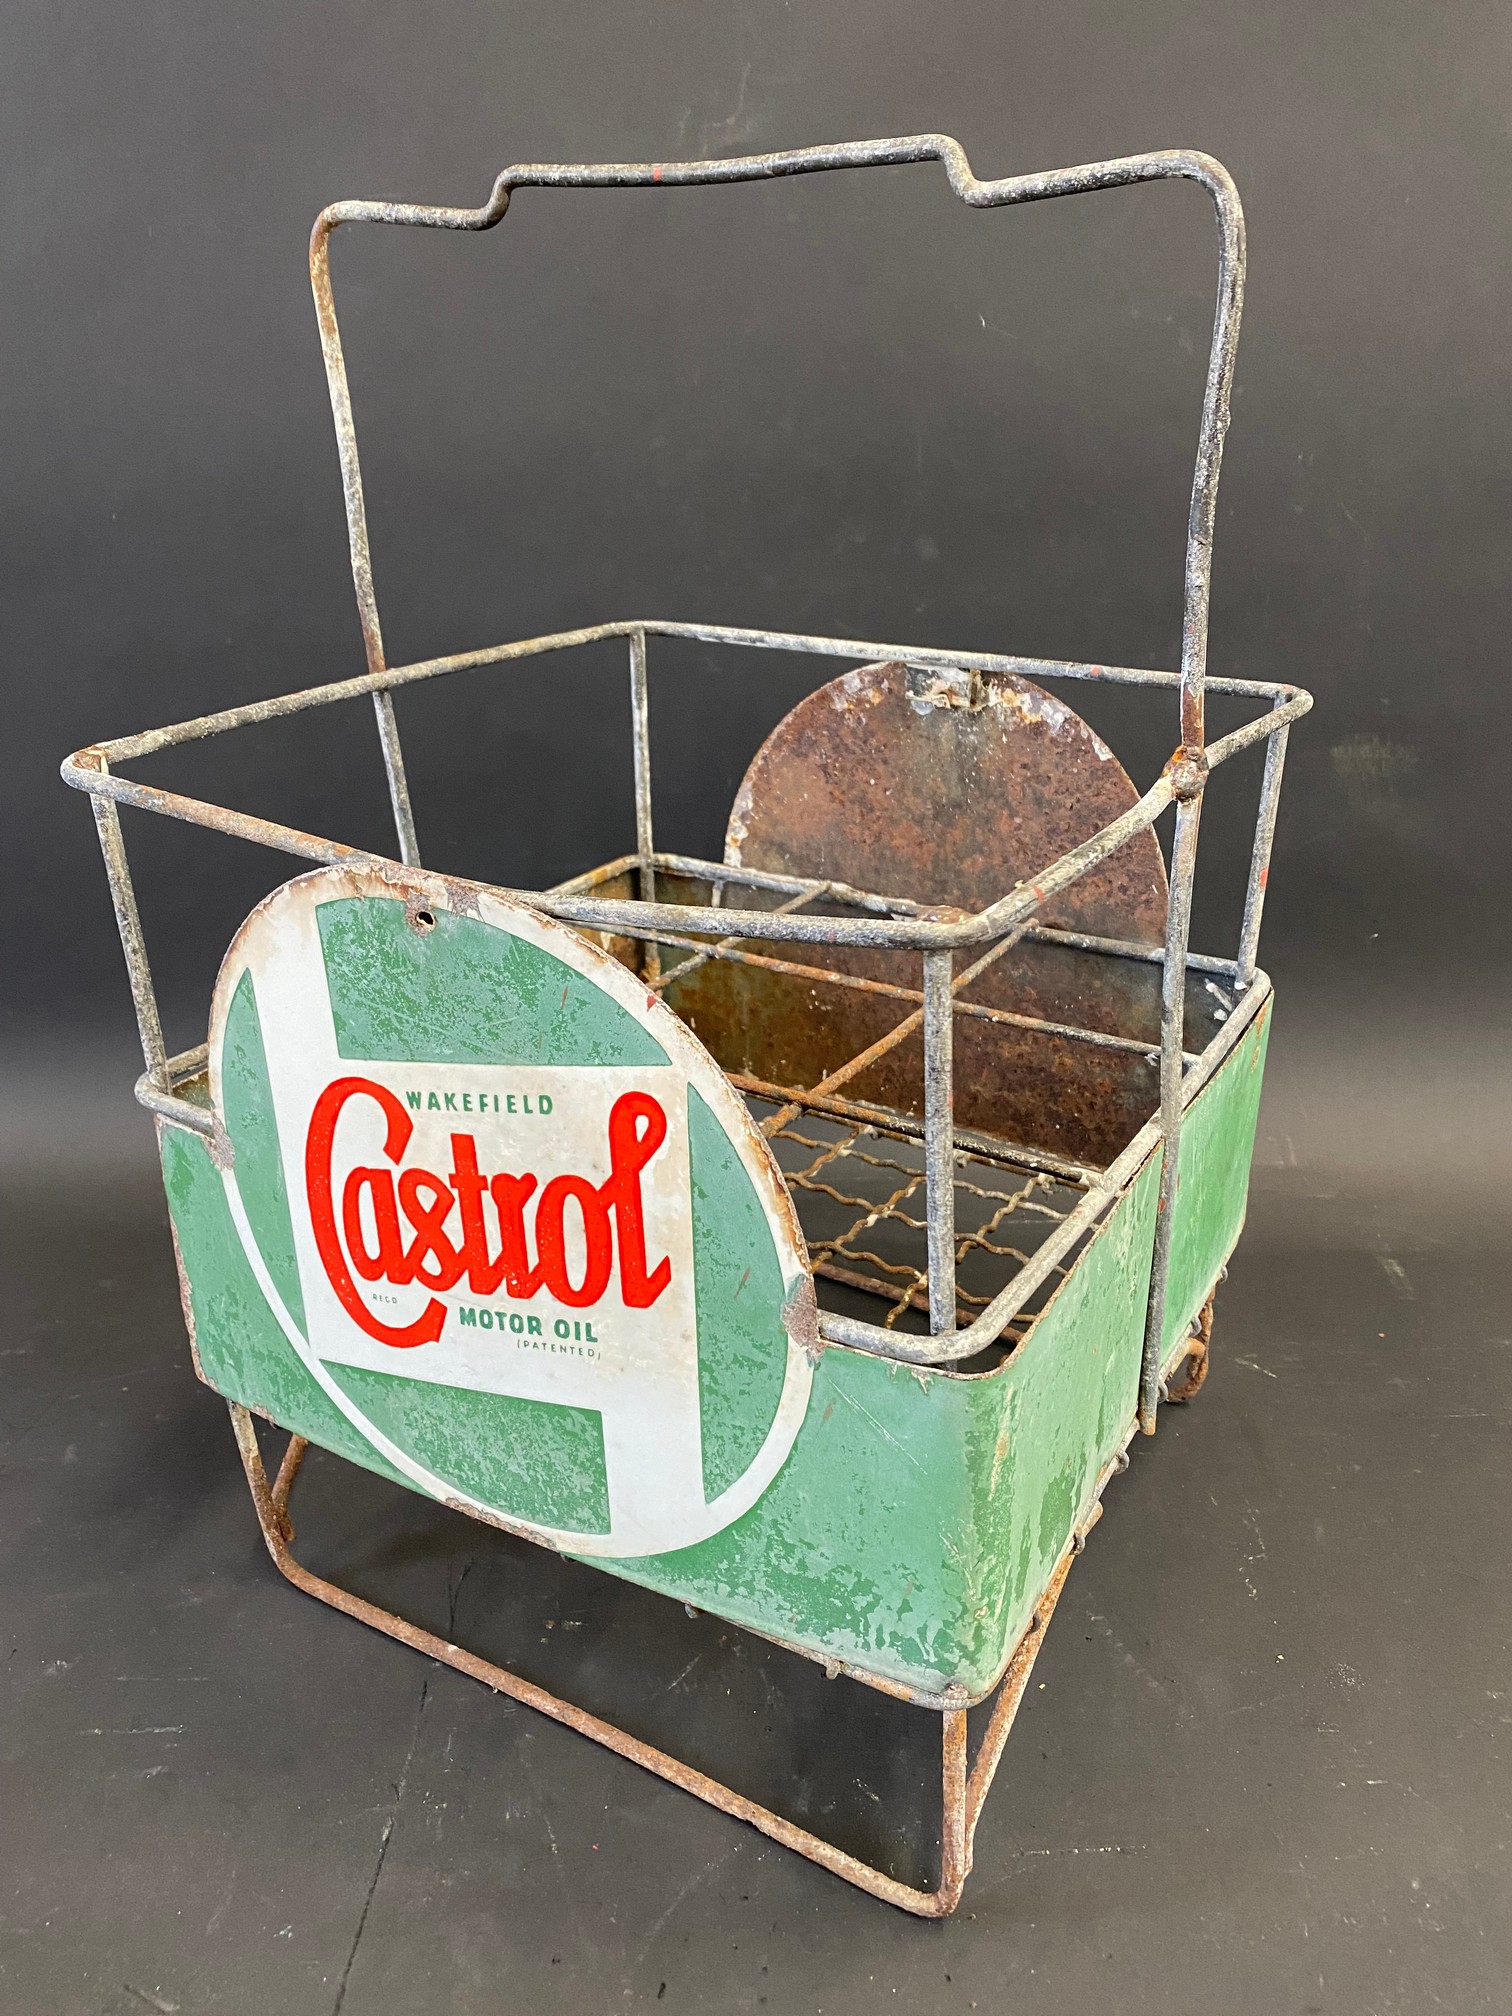 A Wakefield Castrol Motor Oil nine-division crate with two wrap-around enamel signs attached. - Image 2 of 2